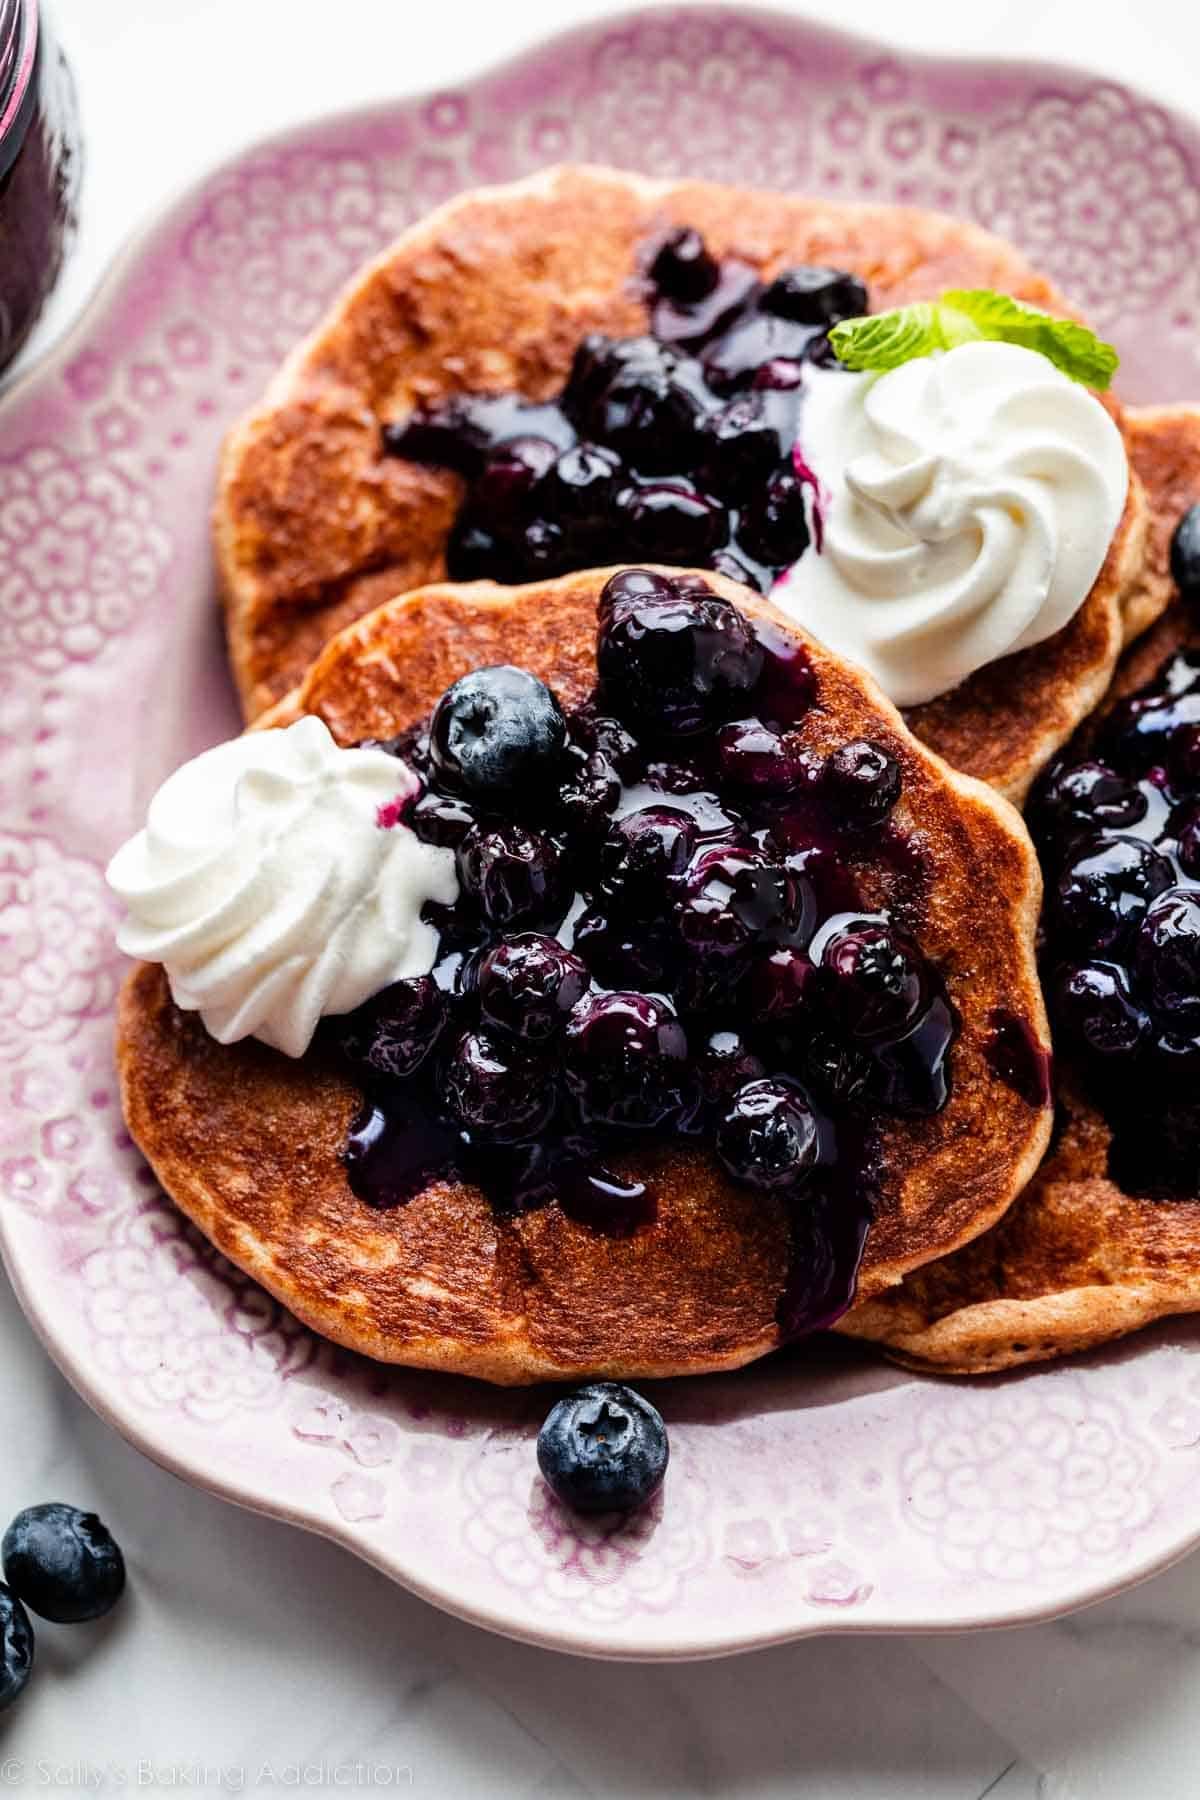 whole wheat pancakes with blueberry sauce topping and piped whipped cream on top.